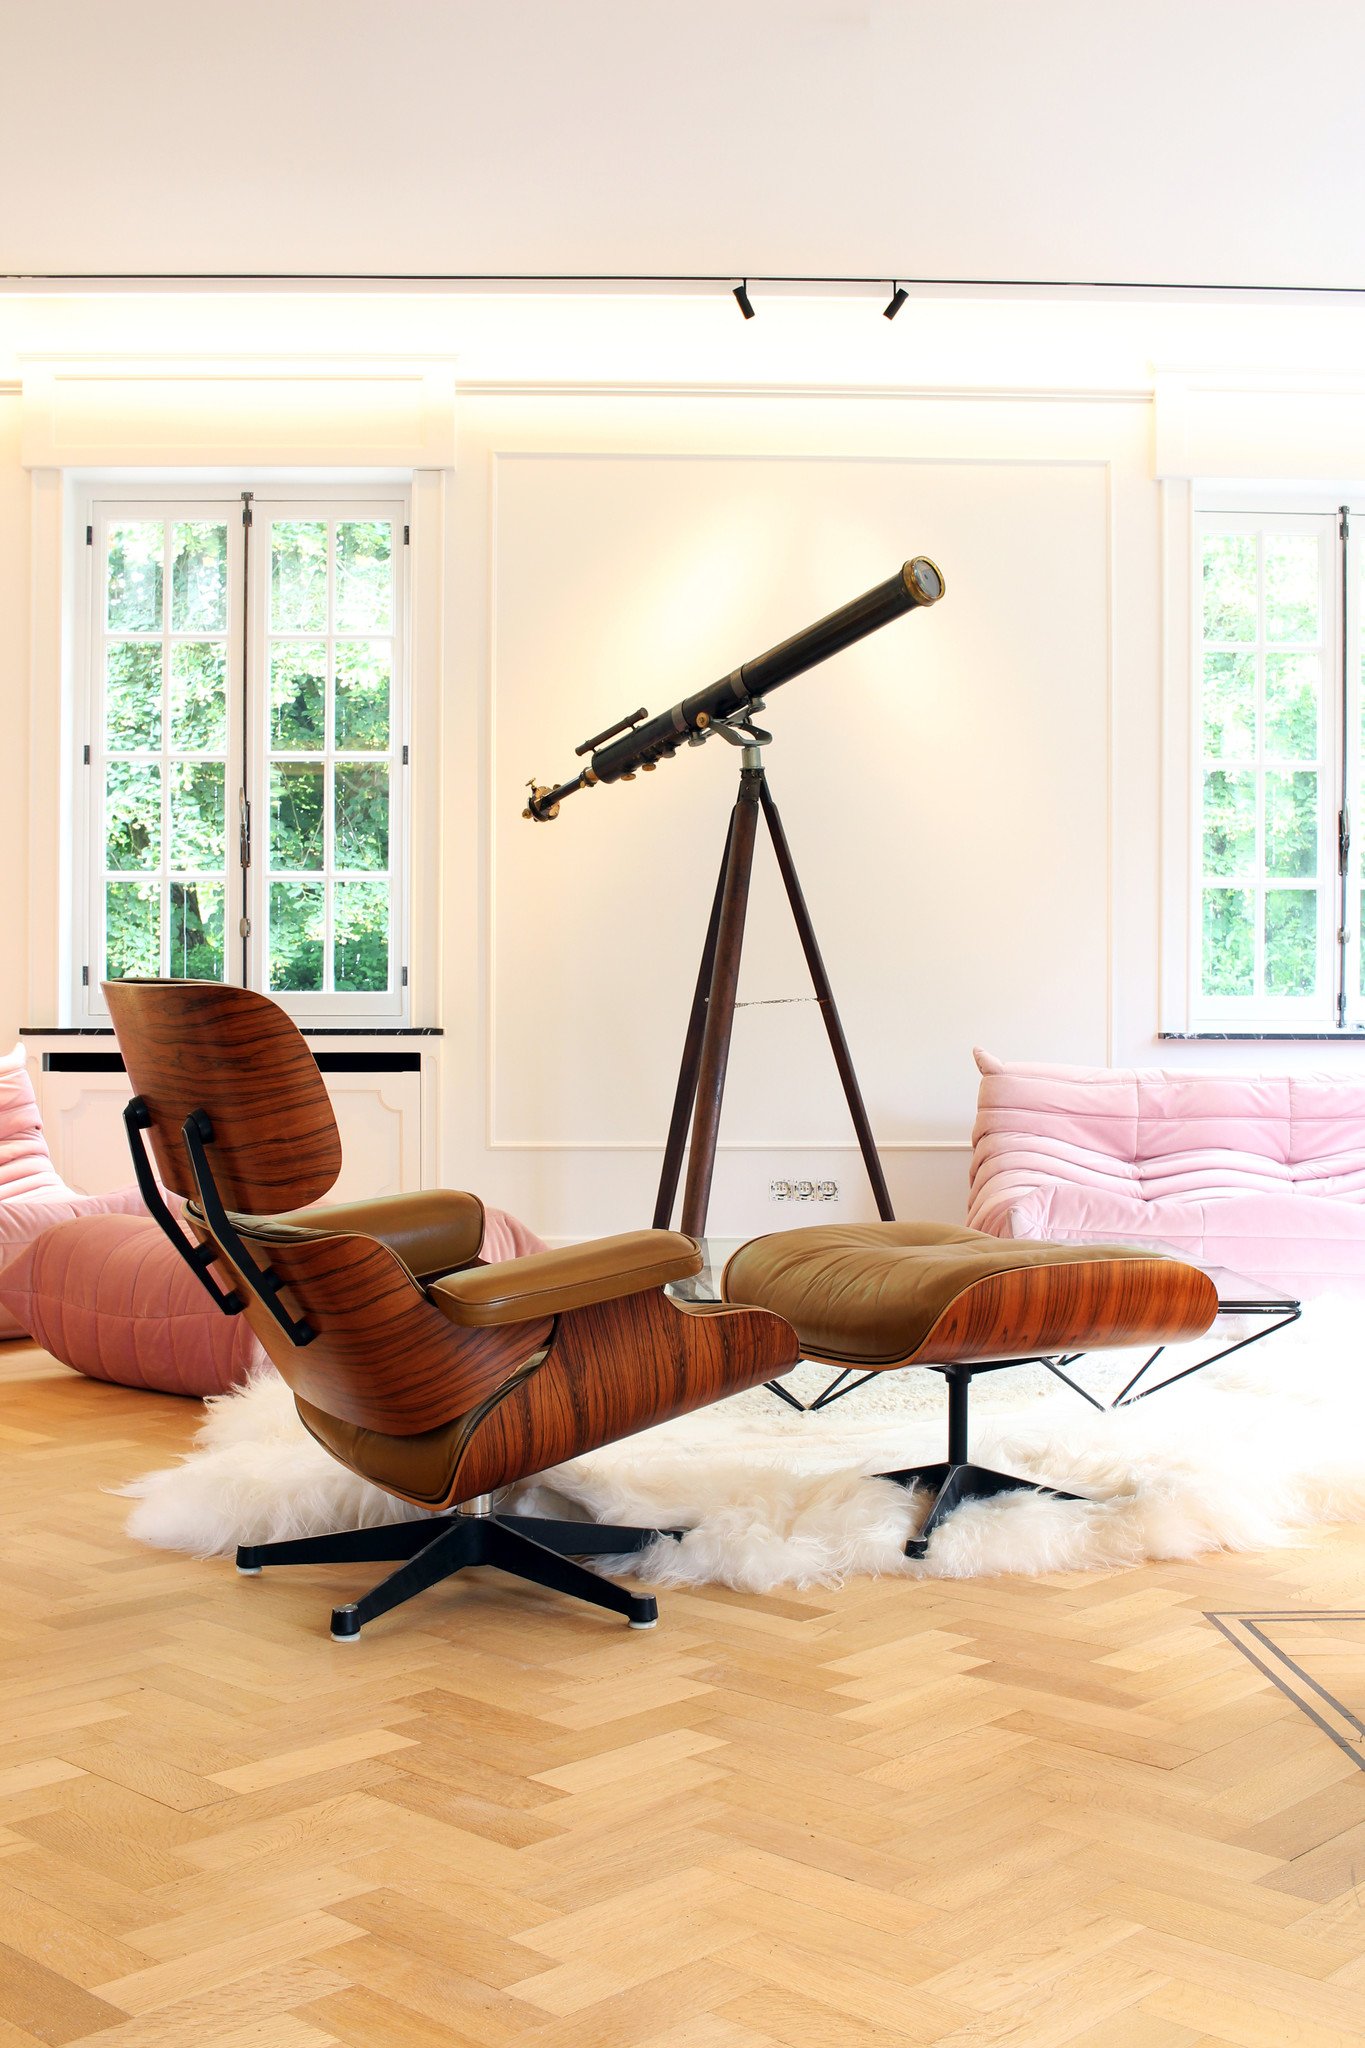 Vintage Eames Lounge chair